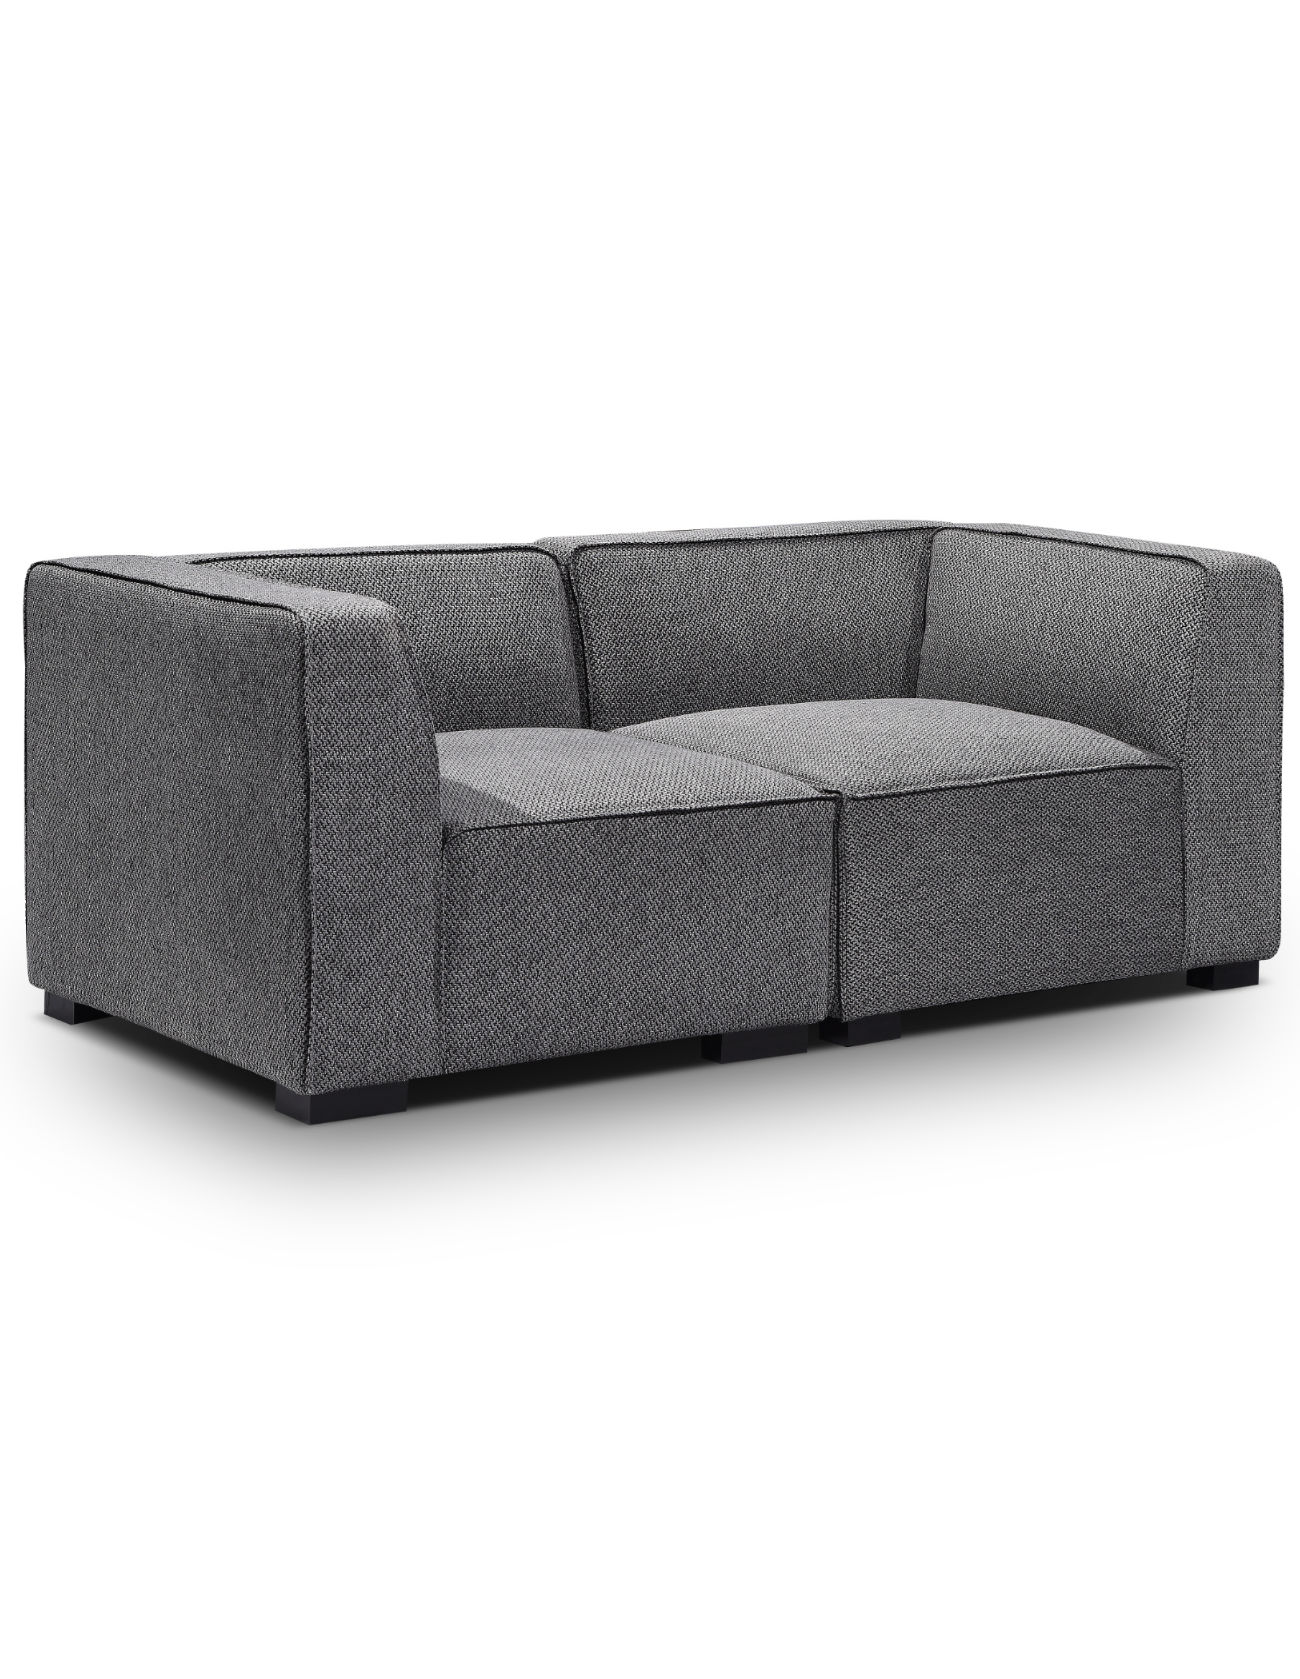 postkantoor eeuwig Integreren The Soft Cube: Love Seat 2 person Sofa - Expand Furniture - Folding Tables,  Smarter Wall Beds, Space Savers